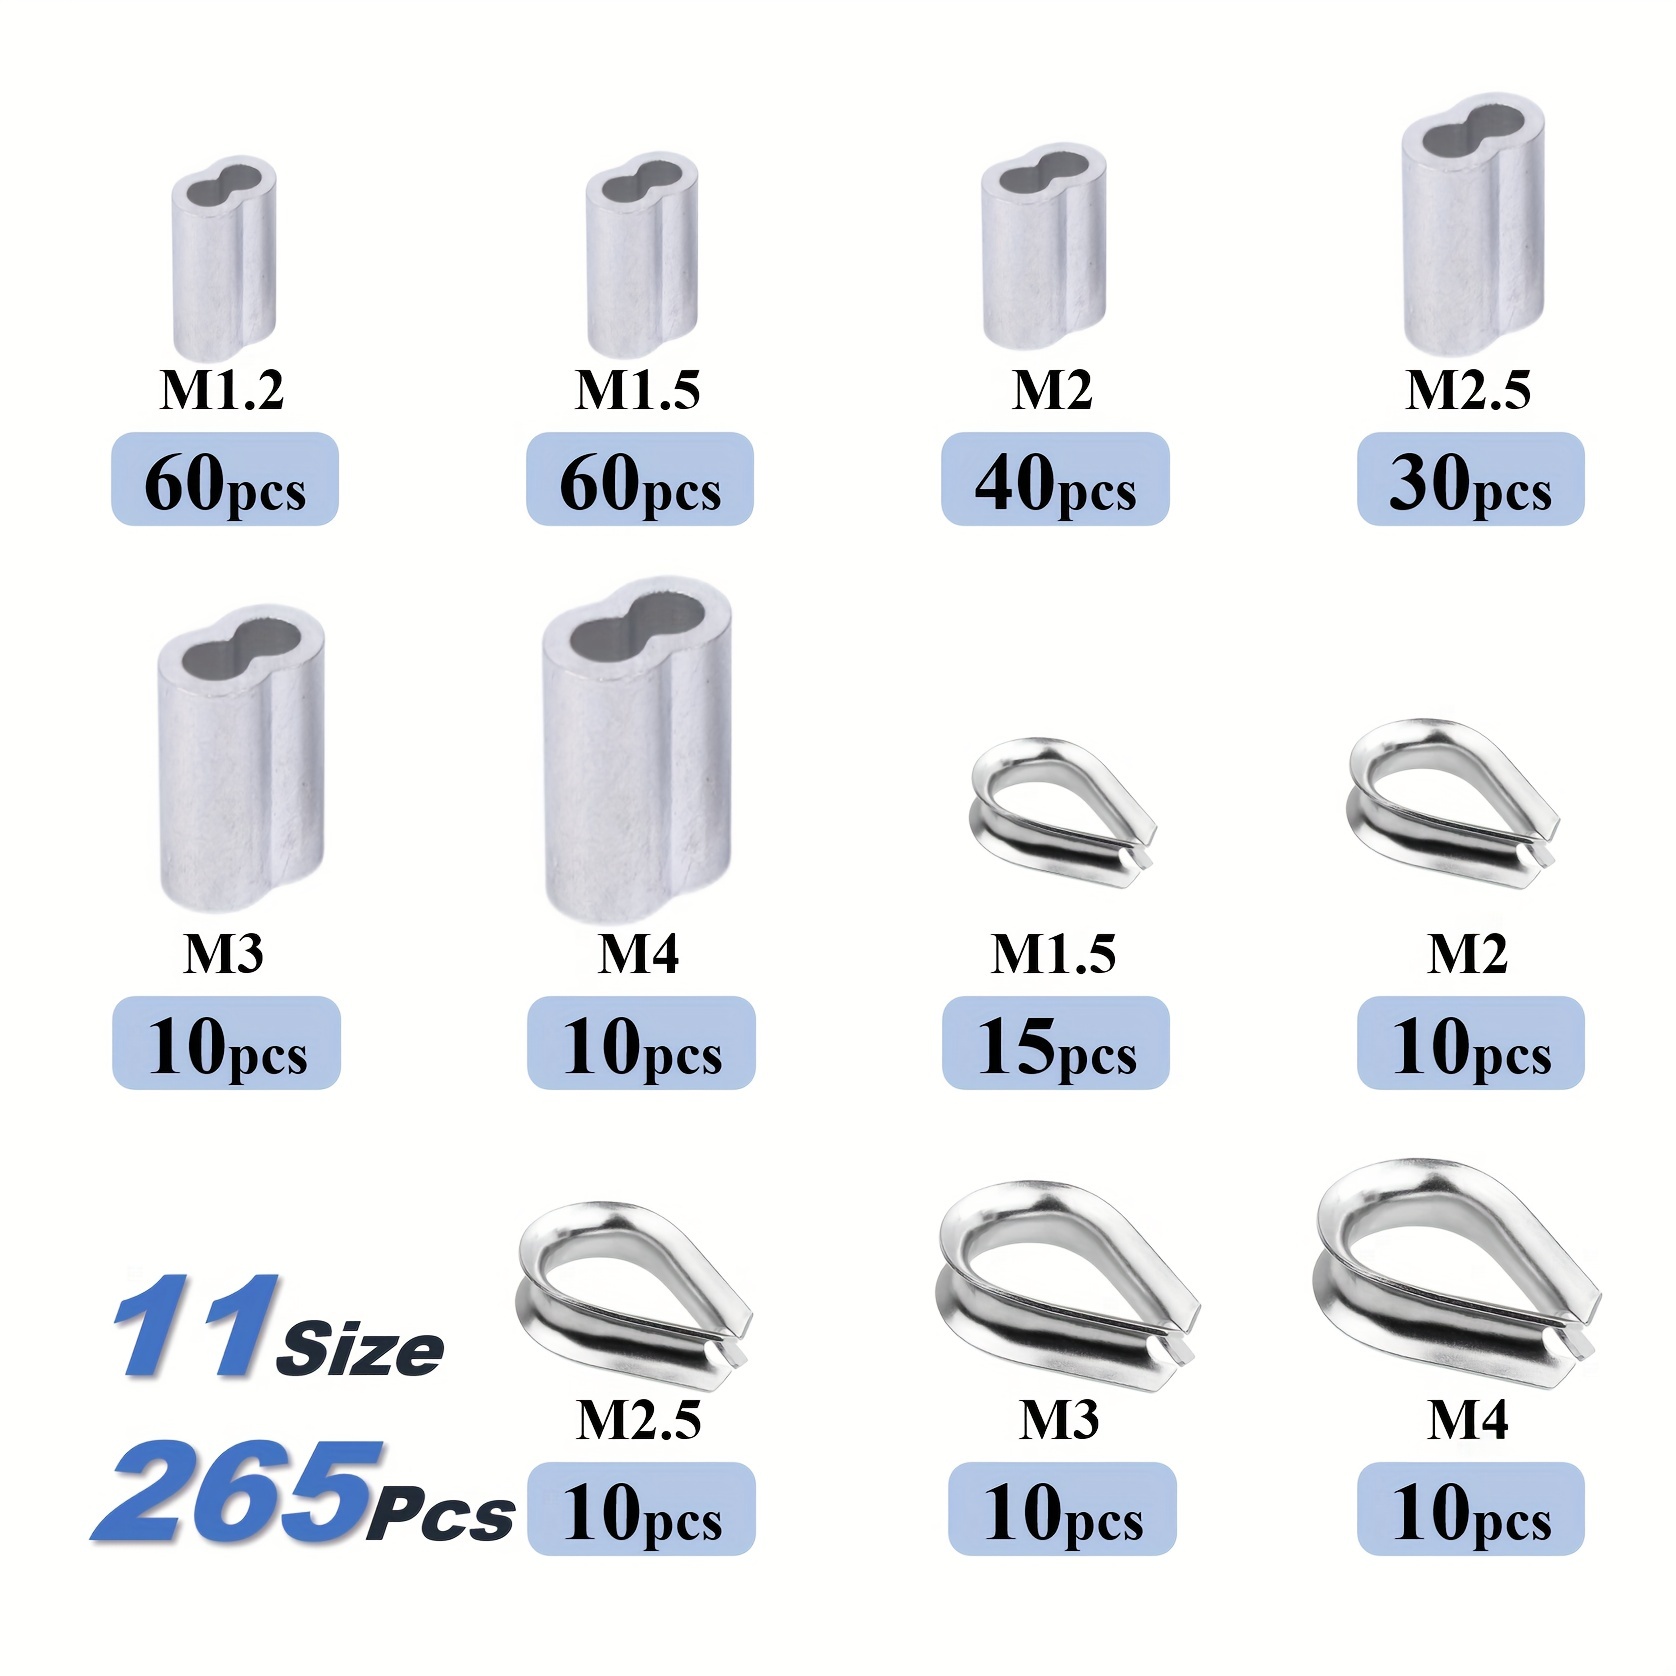 Stainless Steel Thimbles - Heavy Duty Type 304 - 3/8 inch (25 Pack)